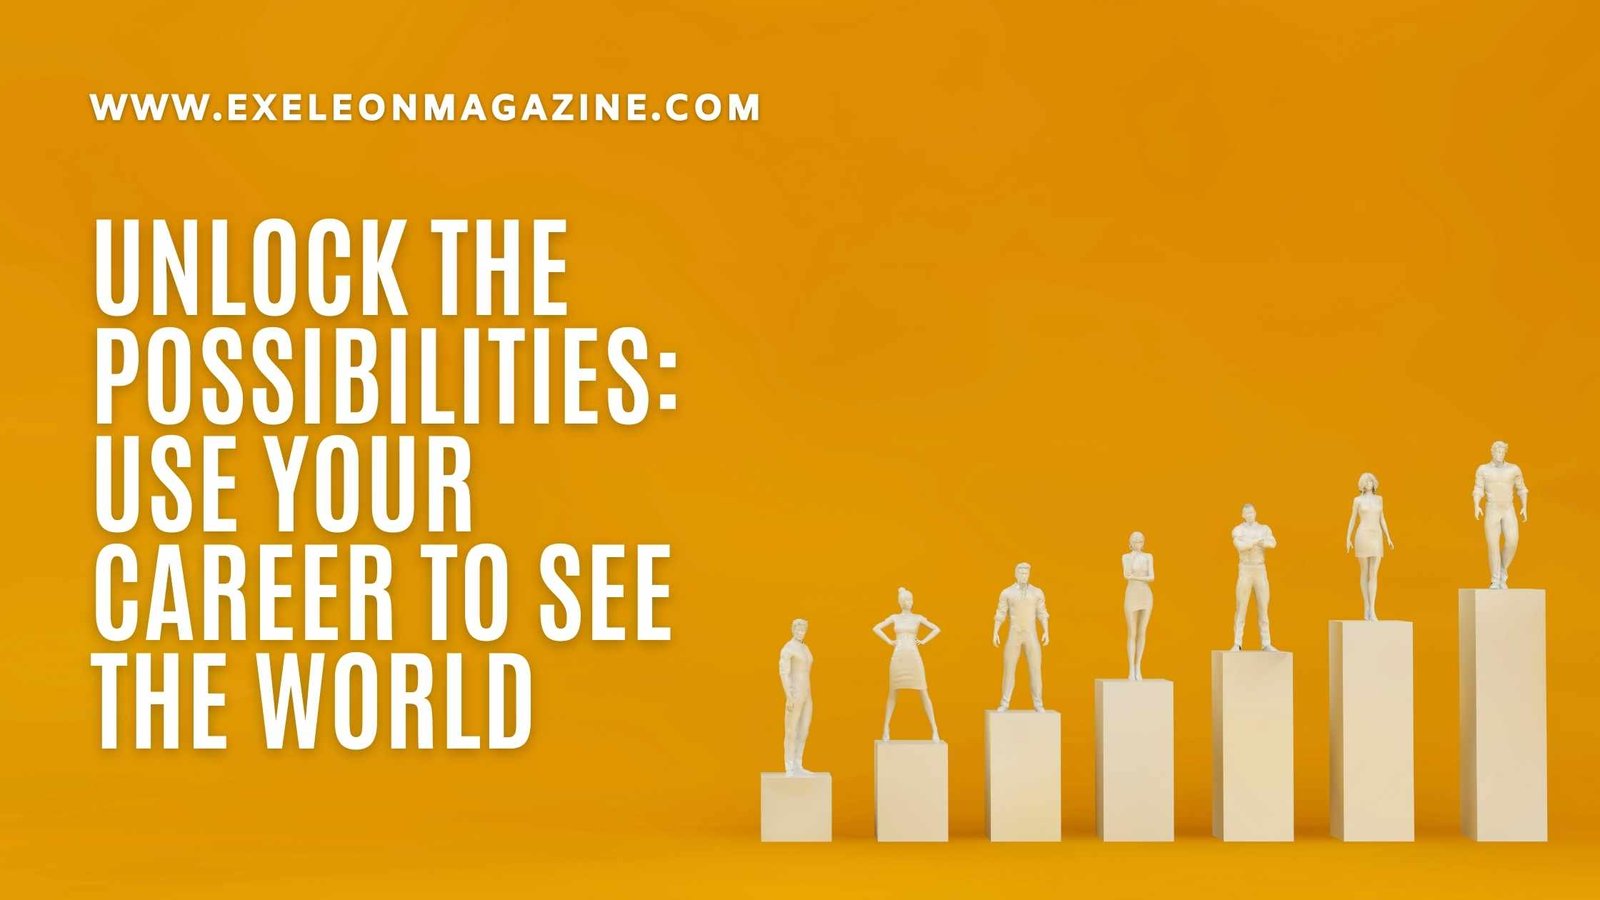 Use Your Career to See the World